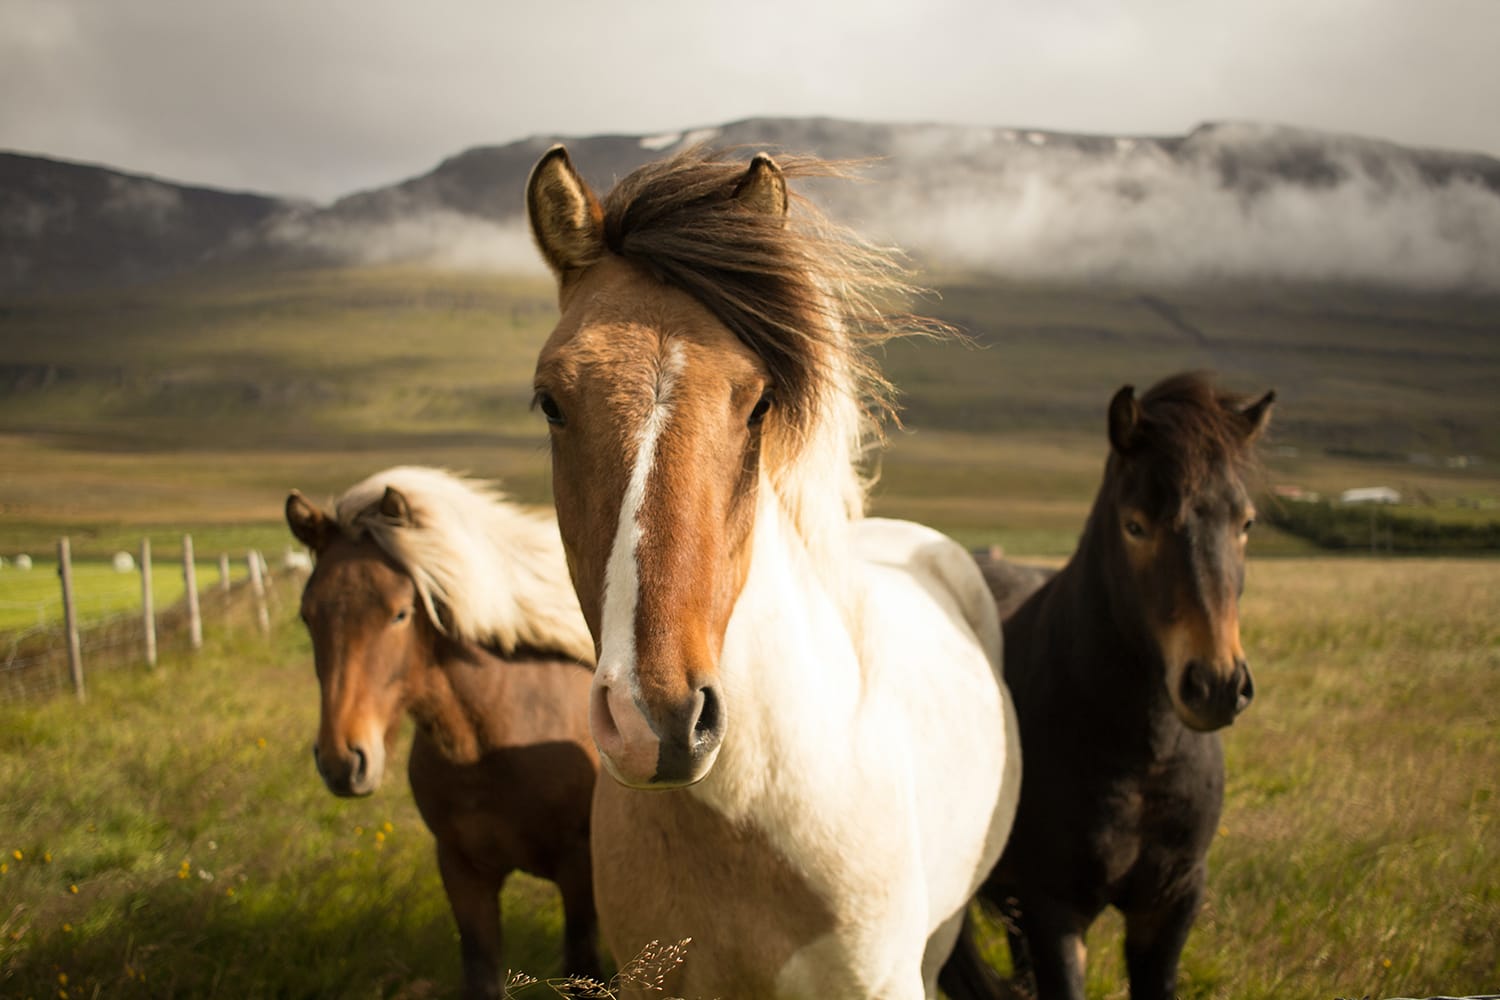 The 12 Best Horse Photography Tips and Tricks